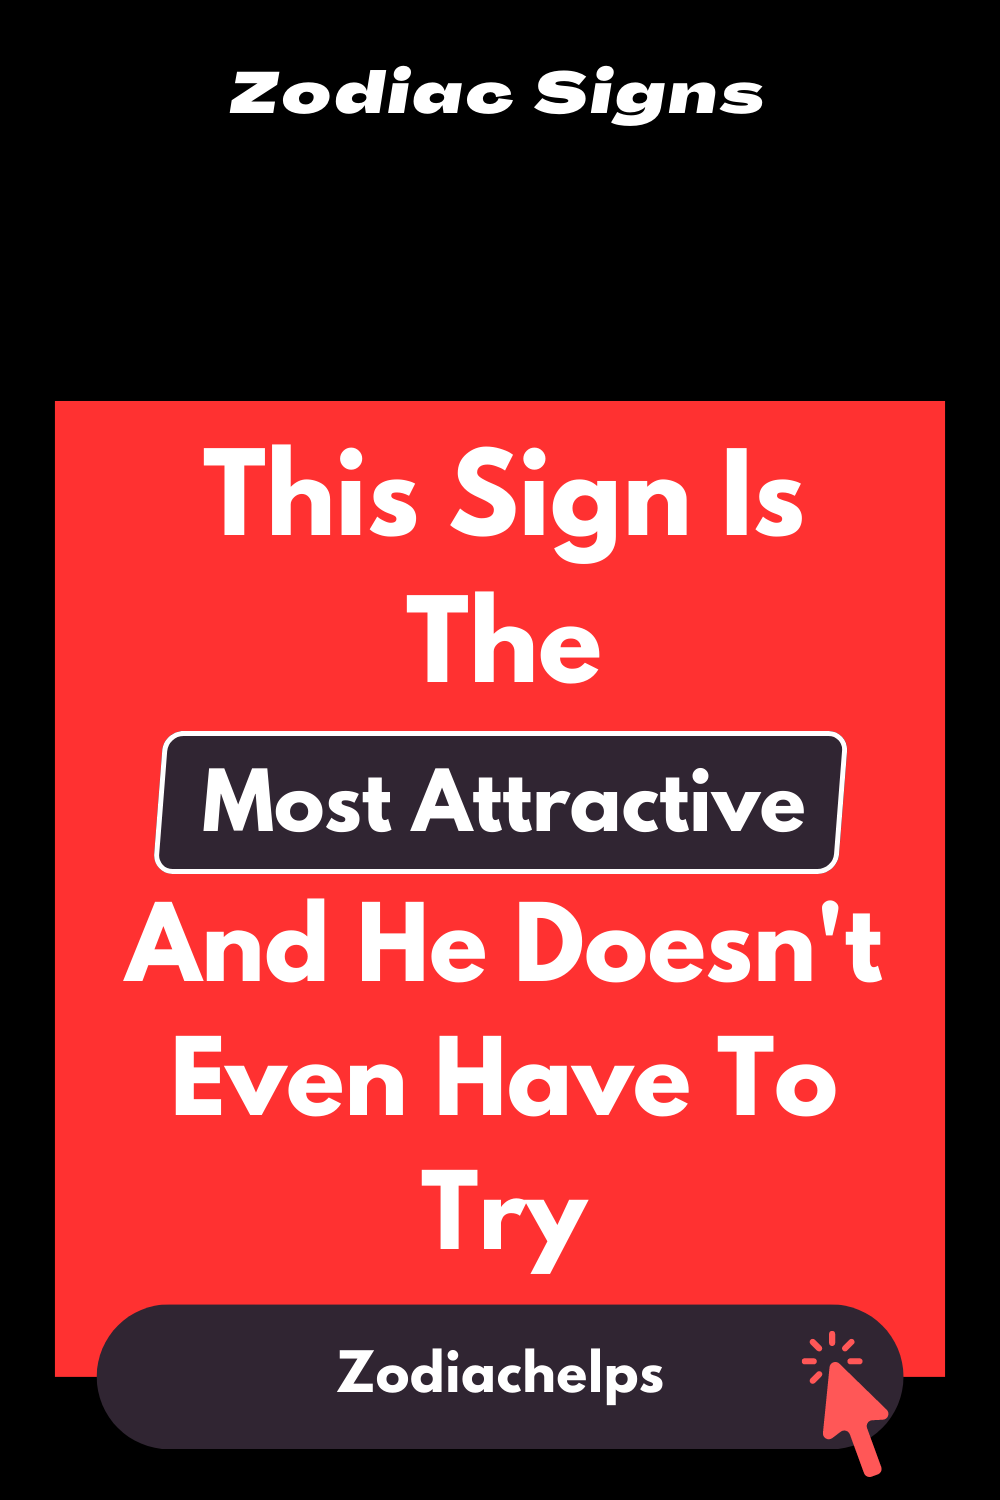 This Sign Is The Most Attractive And He Doesn't Even Have To Try